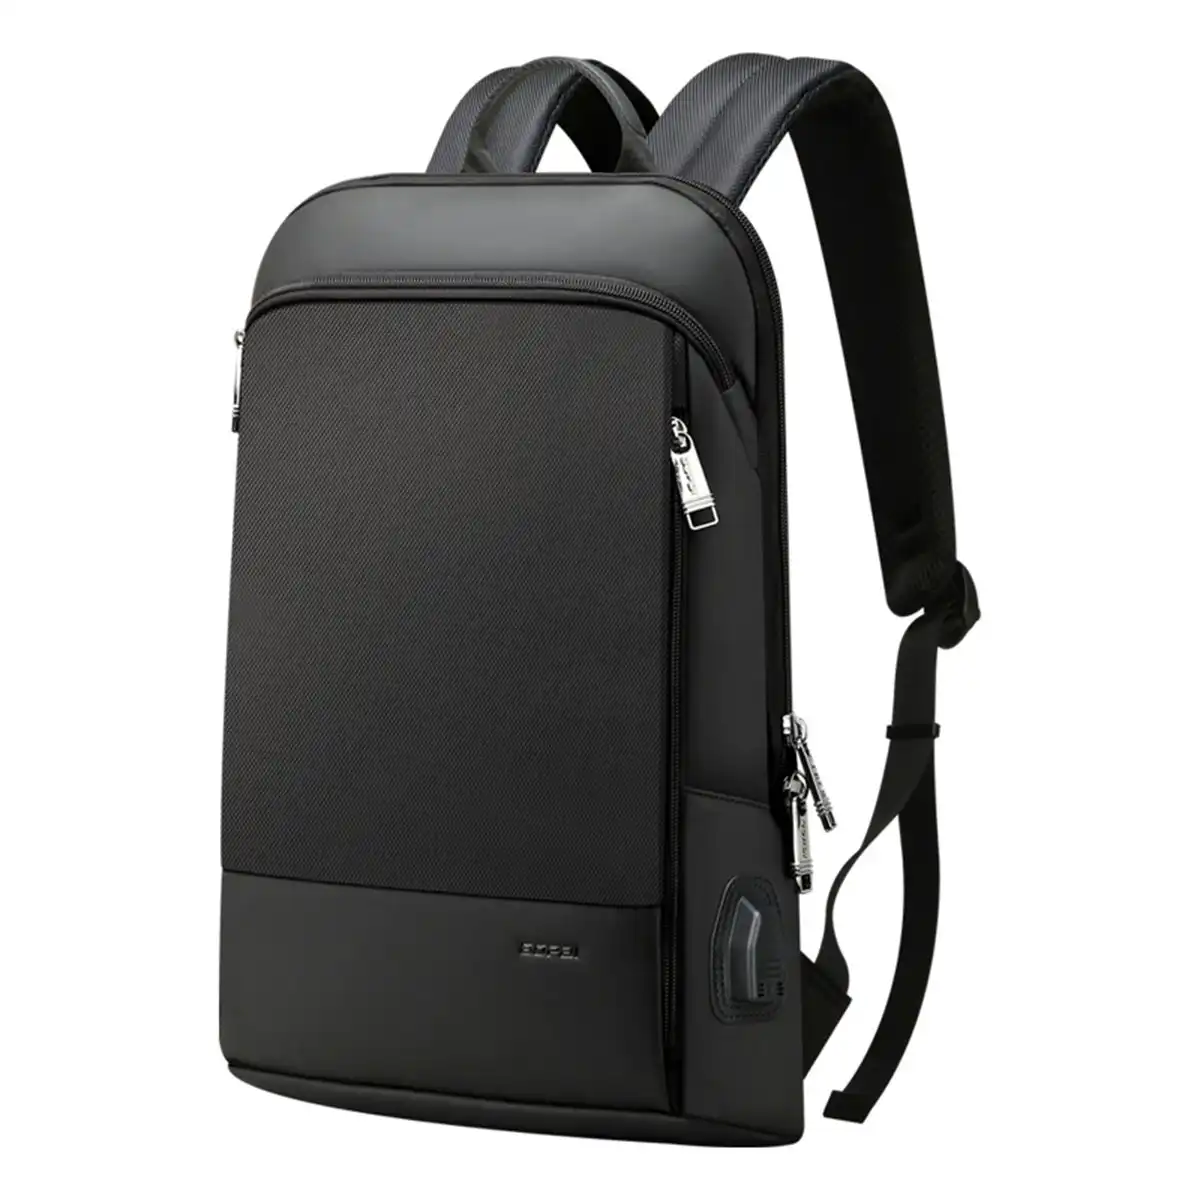 Bopai Luxury Waterproof Leather & Microfibre Anti-Theft With Usb Charging 15.6" Smart Laptop Travel BackpacK B7611